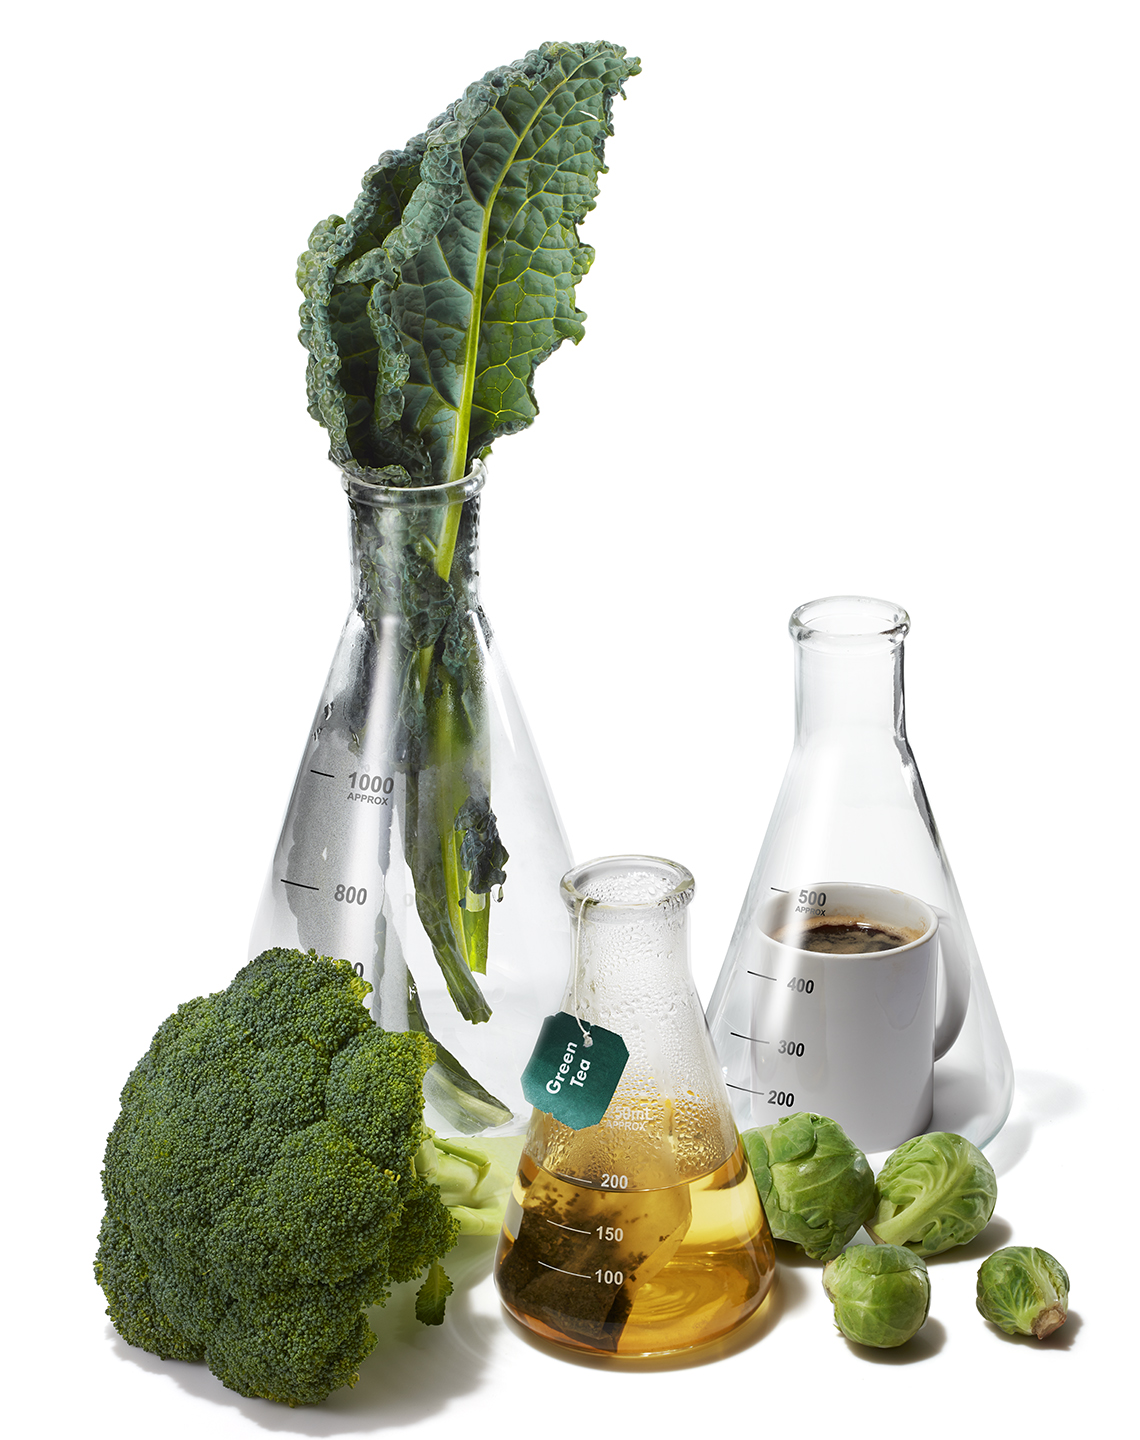 kale brussels sprouts broccoli green tea and coffee are placed inside and around scientific beakers and flasks to symbolize research